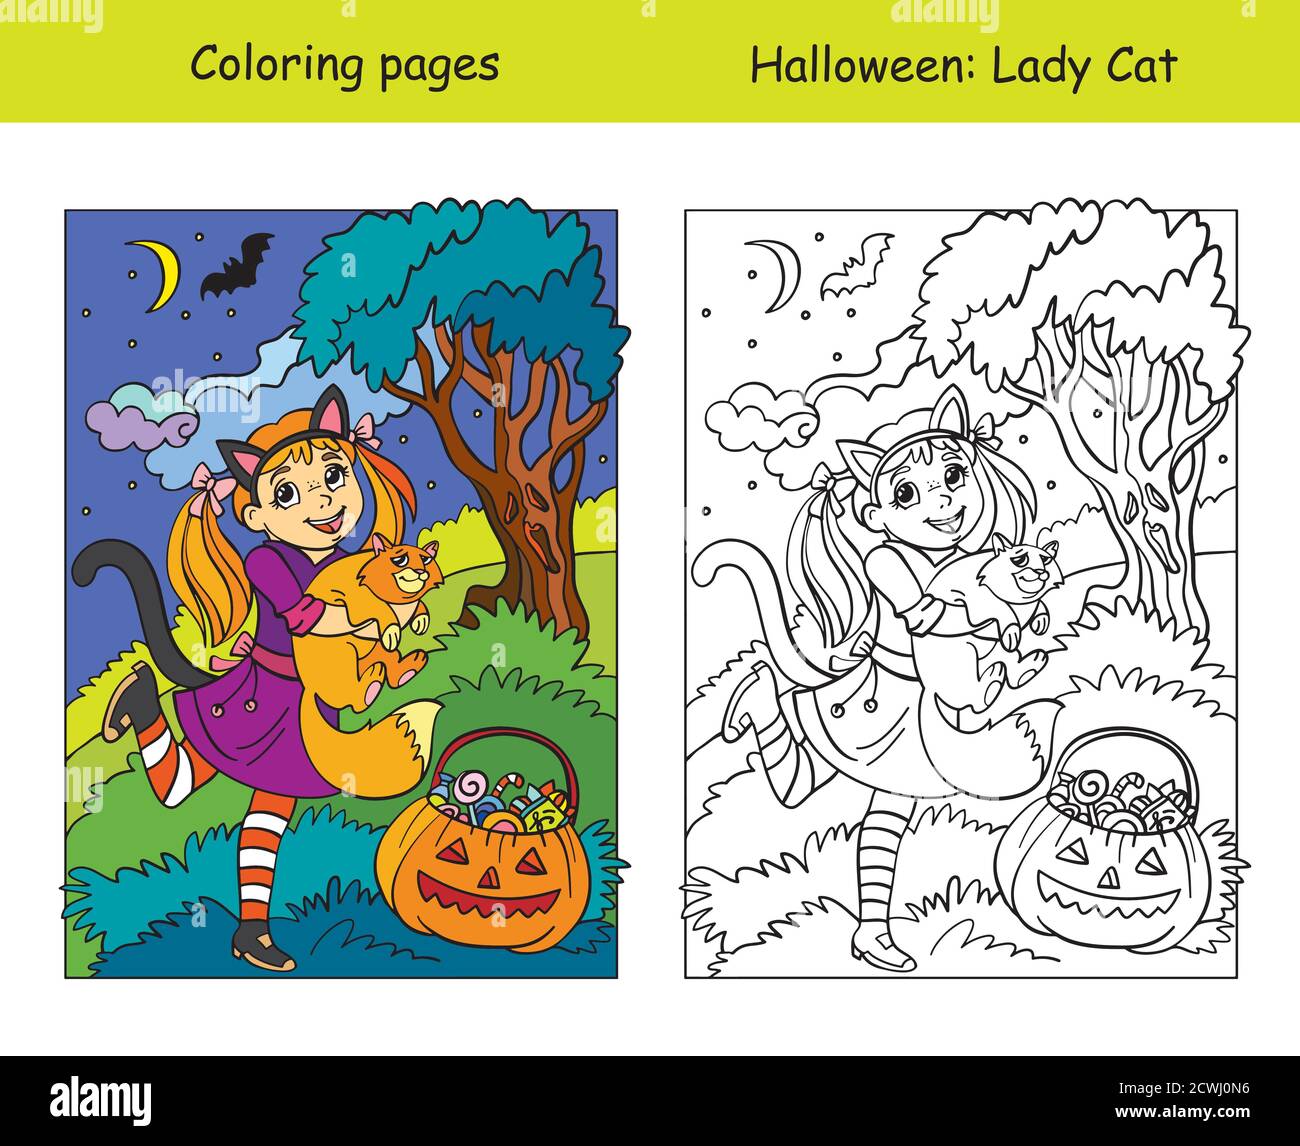 Coloring with colored example Halloween girl with cat Stock Vector